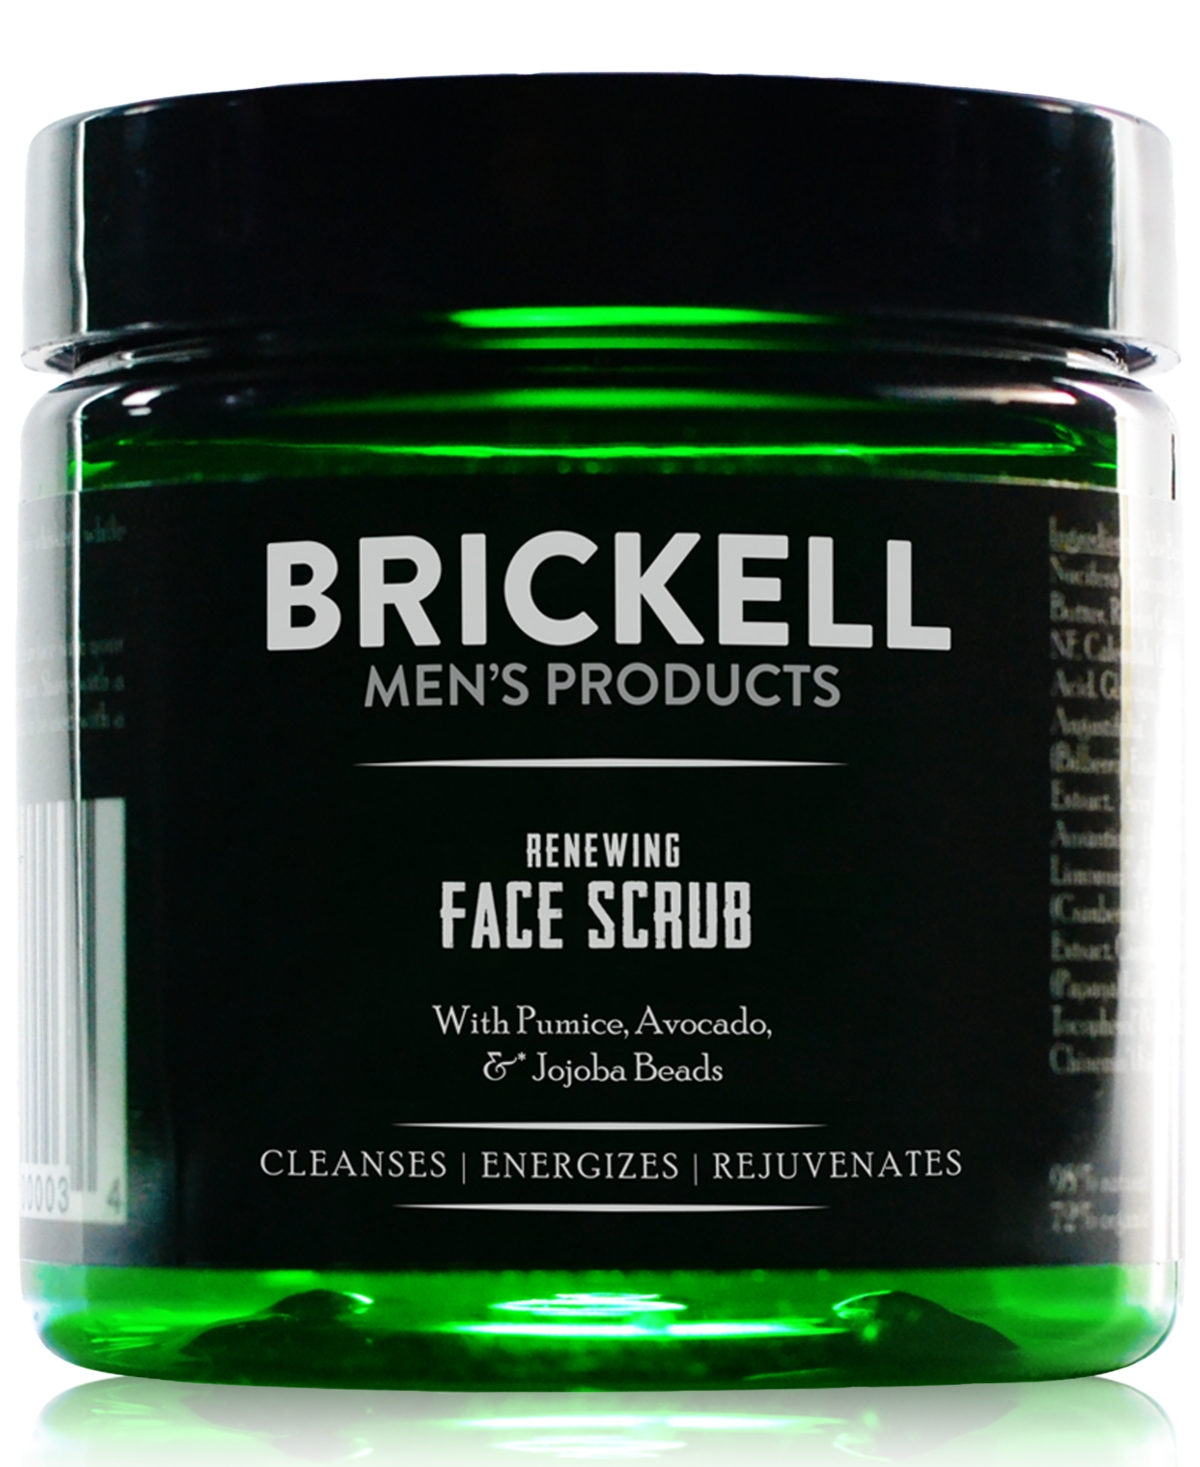 Brickell Mens Products Brickell Men's Products Renewing Face Scrub, 4 Oz.